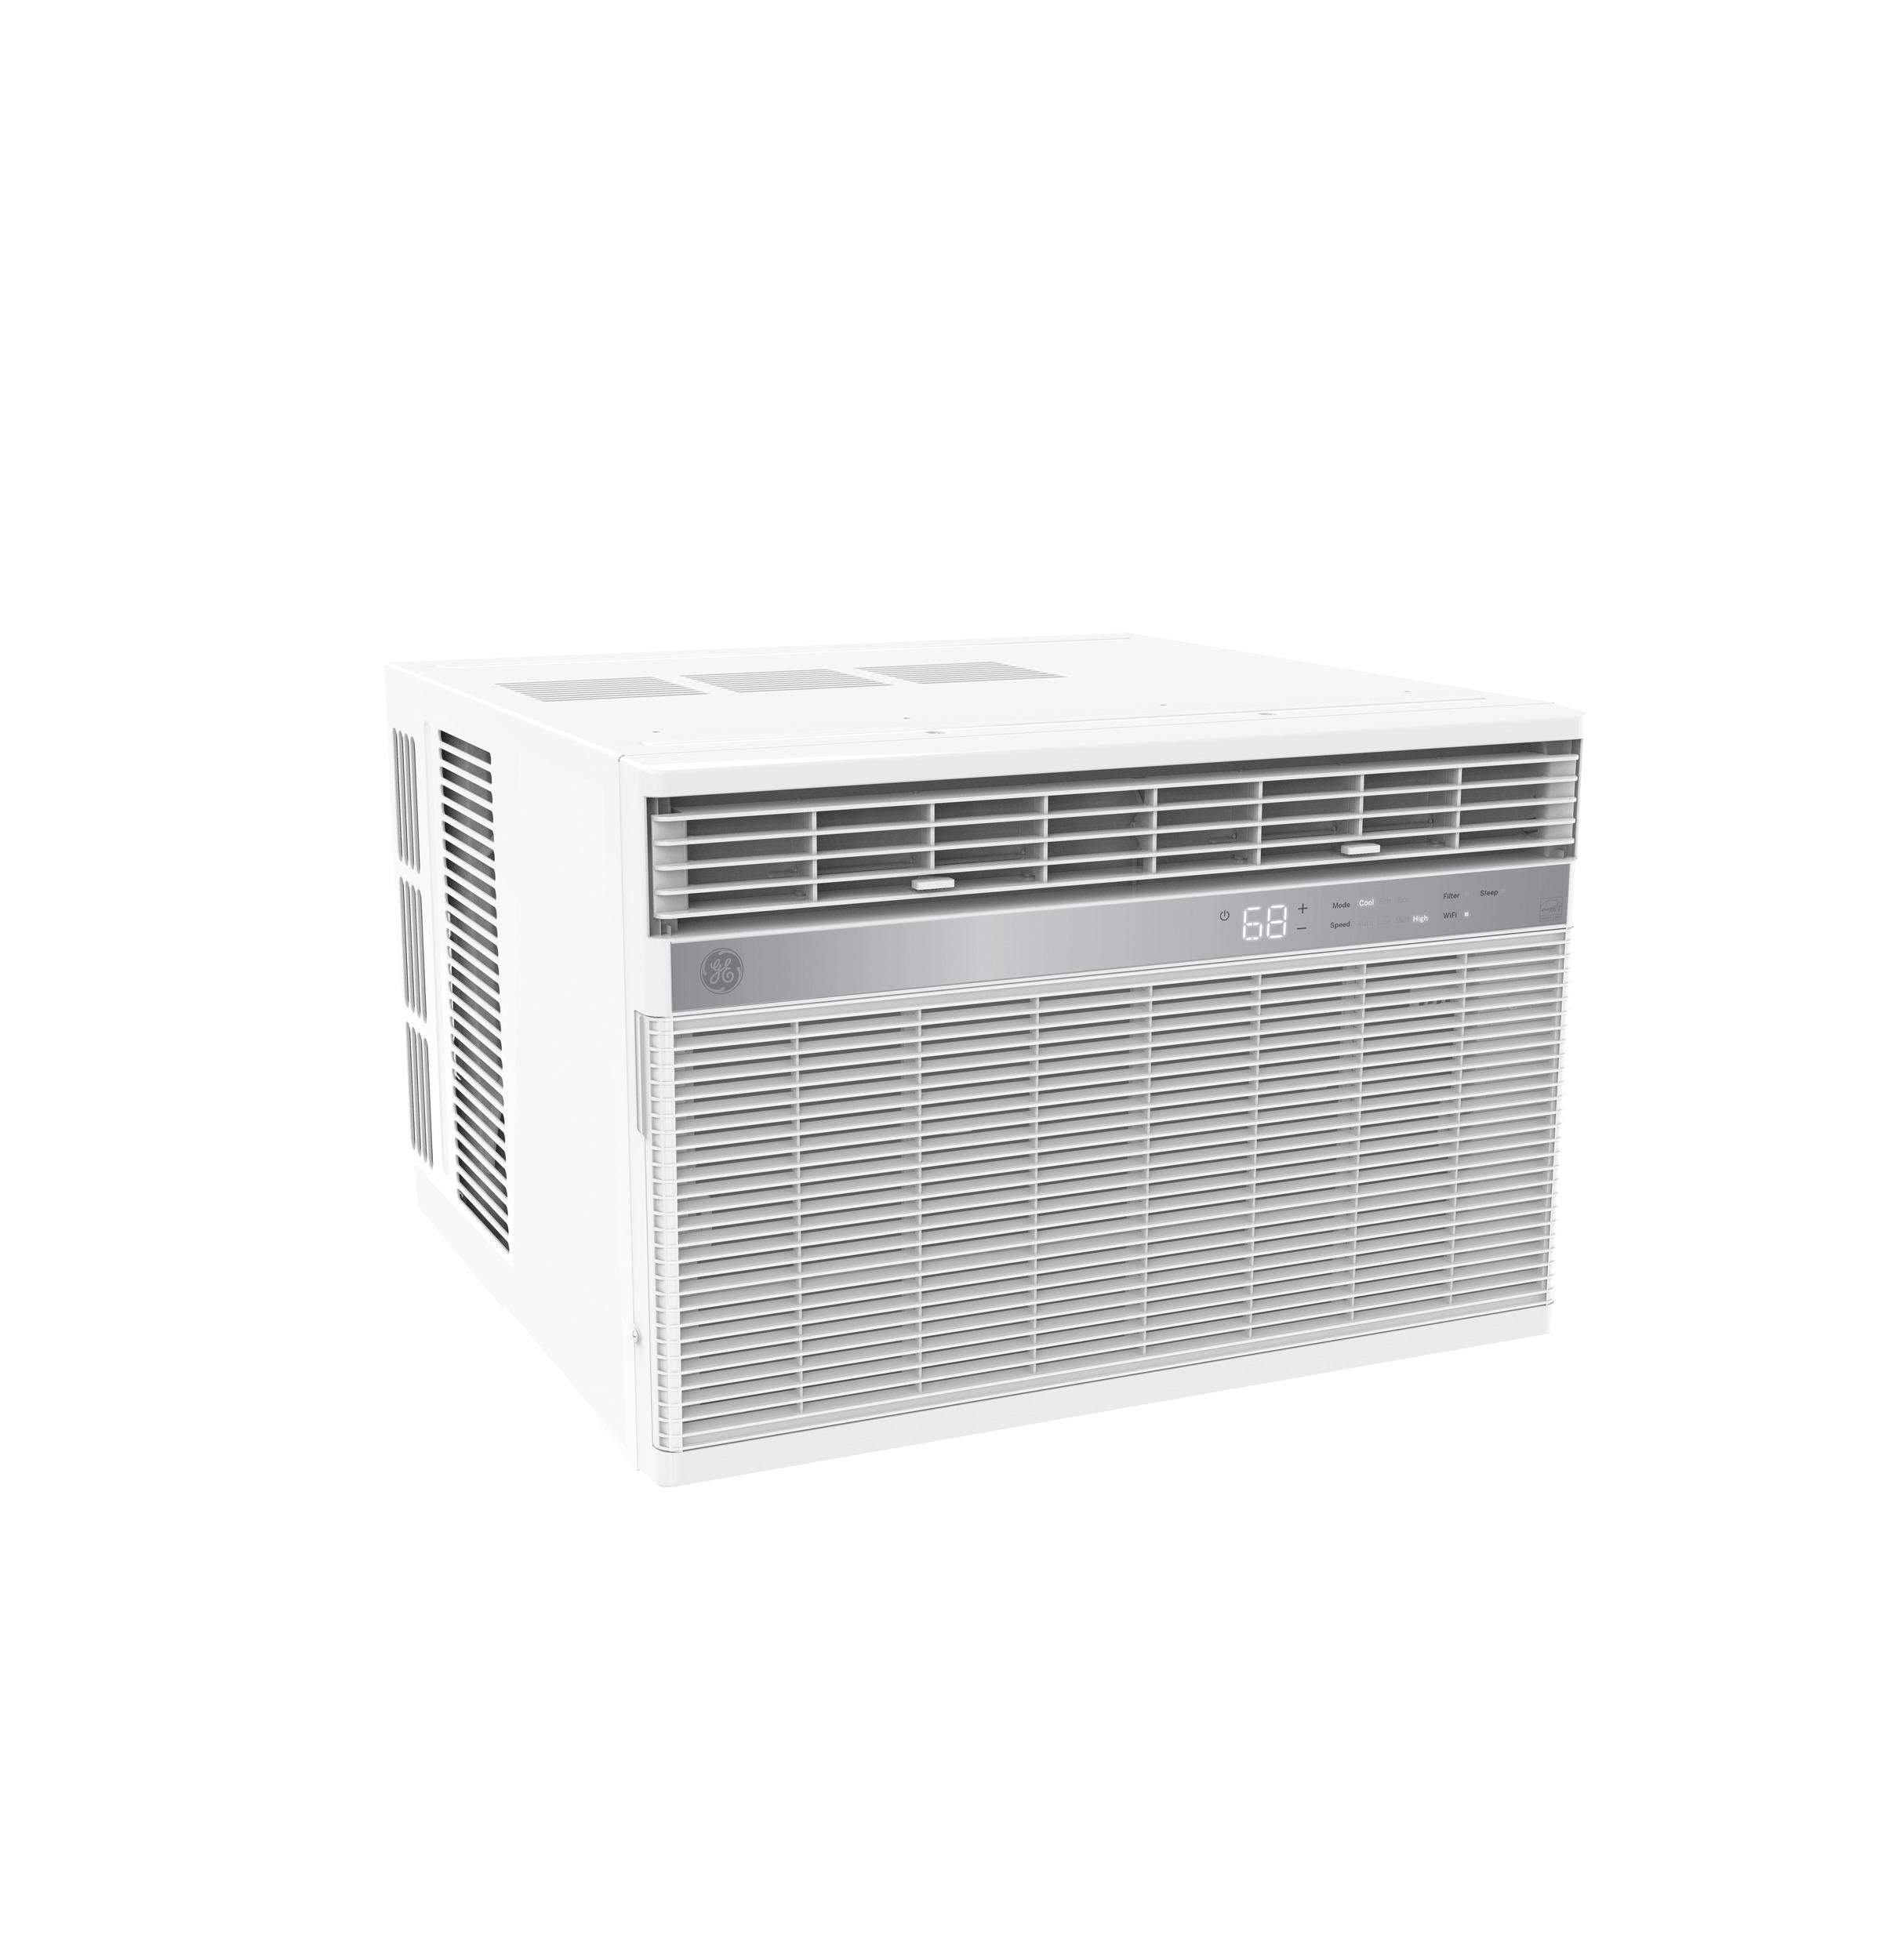 GE® ENERGY STAR® 18,000 BTU Smart Electronic Window Air Conditioner for Extra-Large Rooms up to 1000 sq. ft.